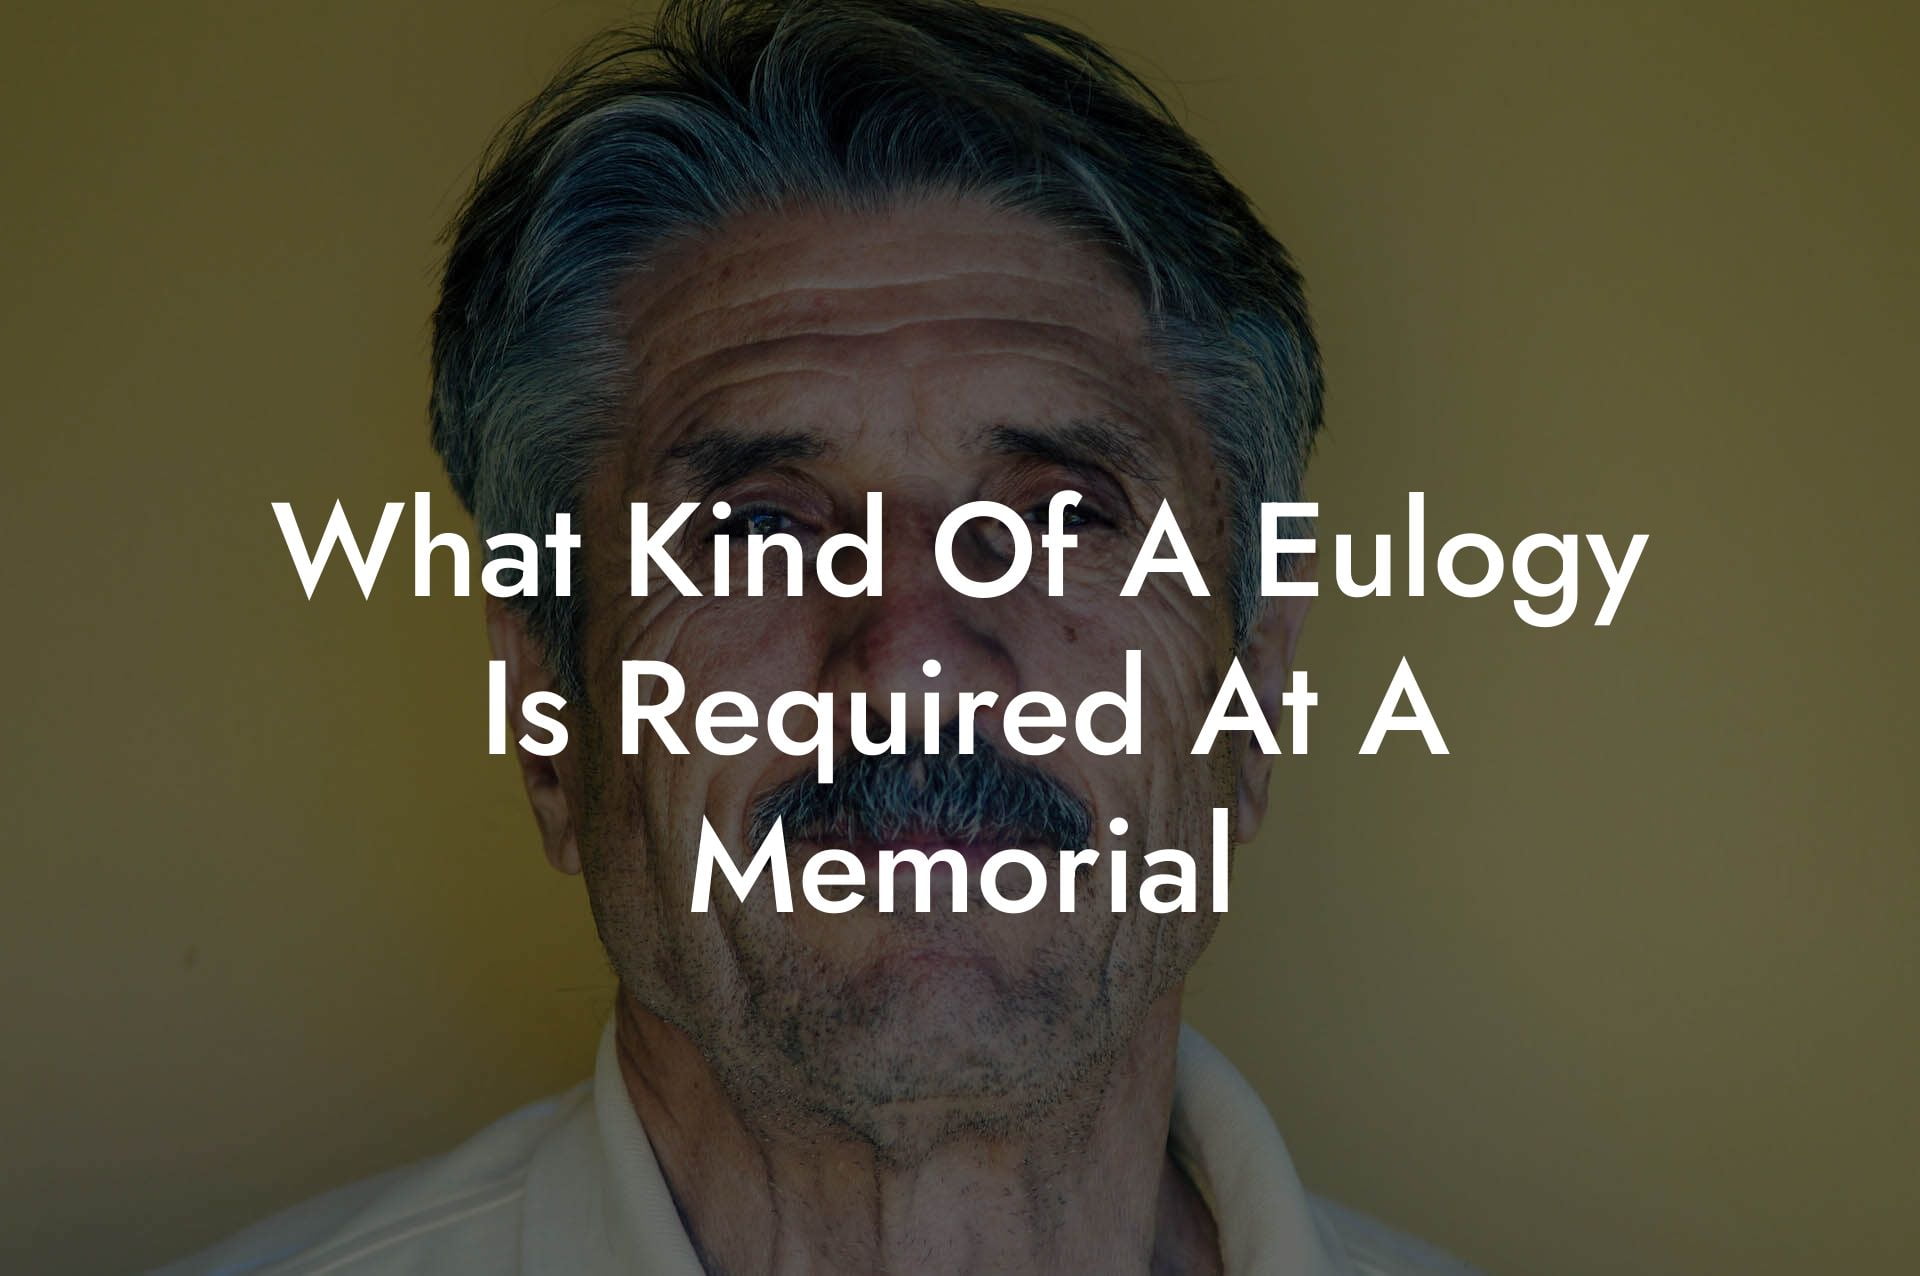 What Kind Of A Eulogy Is Required At A Memorial